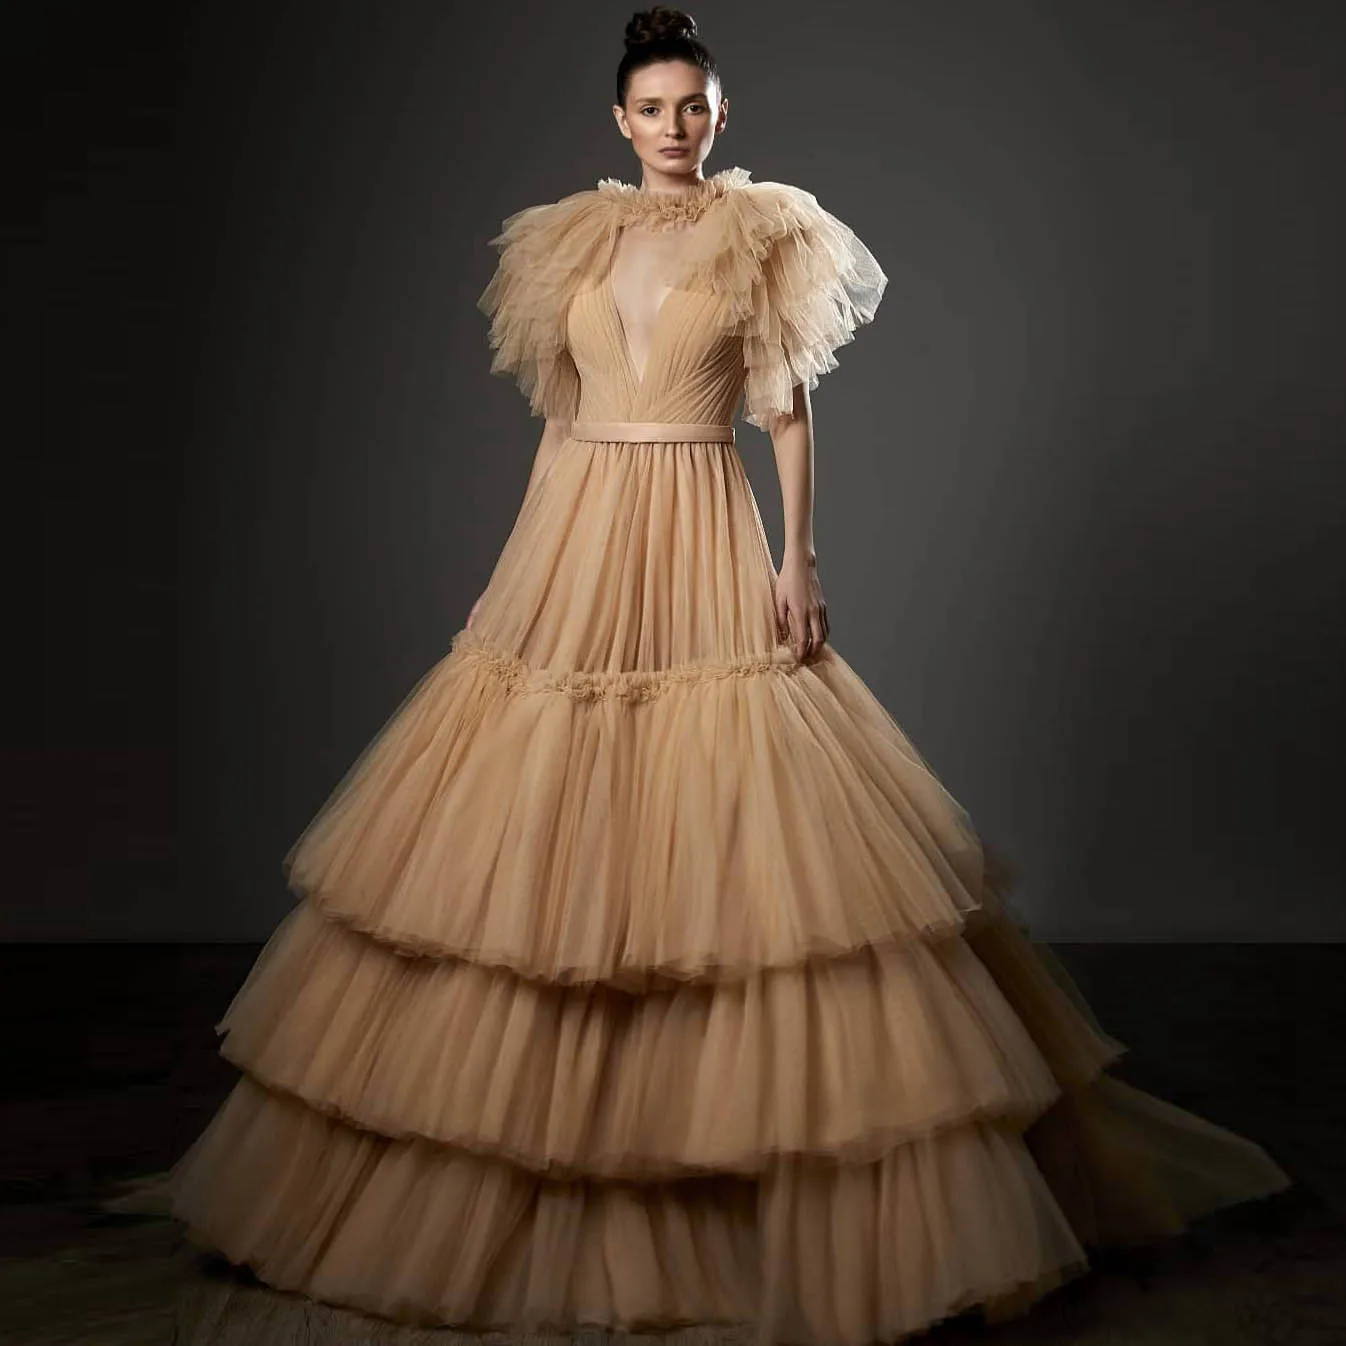 

Elegant Champagne Long Tulle Prom Gowns Ruffled Tiered Puffy Tutu Bridal Dress Short Sleeves Tutu Robe Women Dress Event Party